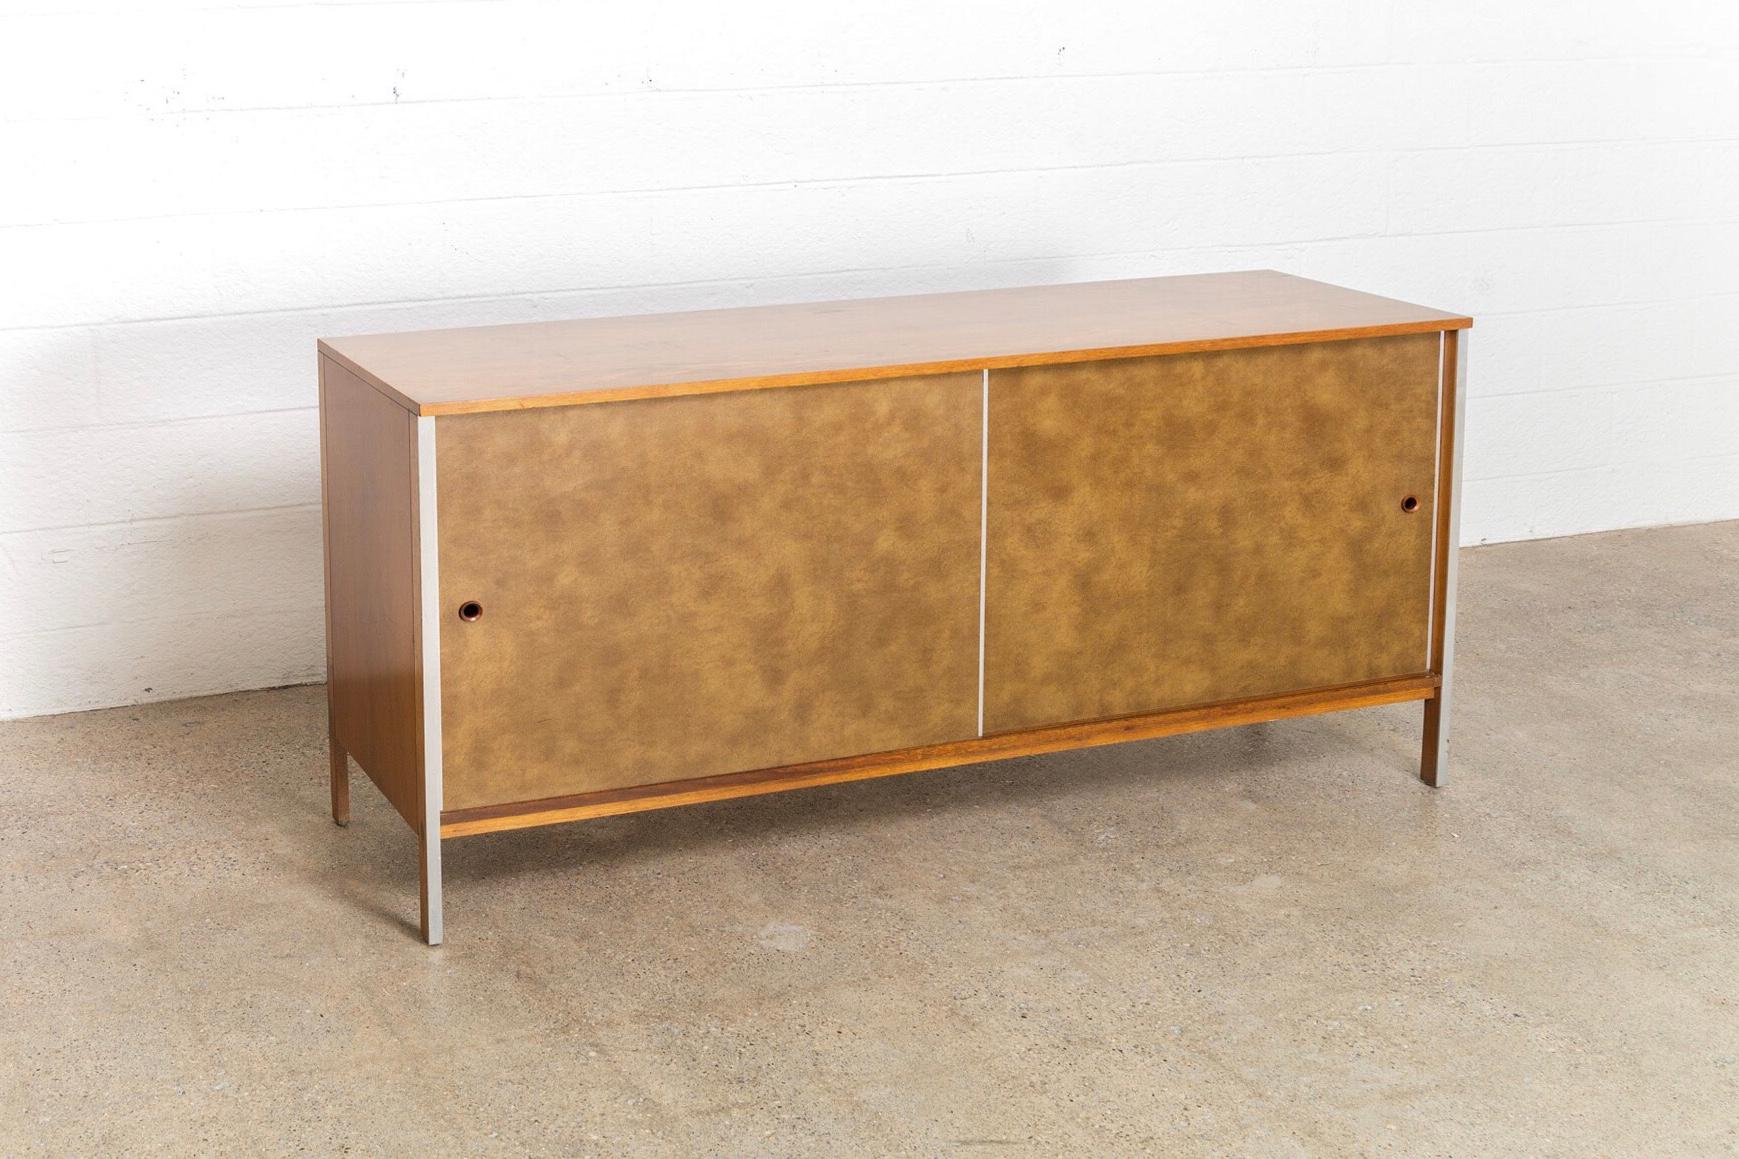 This vintage Mid-Century Modern Paul McCobb walnut credenza was produced by Calvin Furniture, circa 1960. Part of the Linear Group Line, the credenza has sliding leatherette doors opening to two drawers on the left and a spacious storage area on the